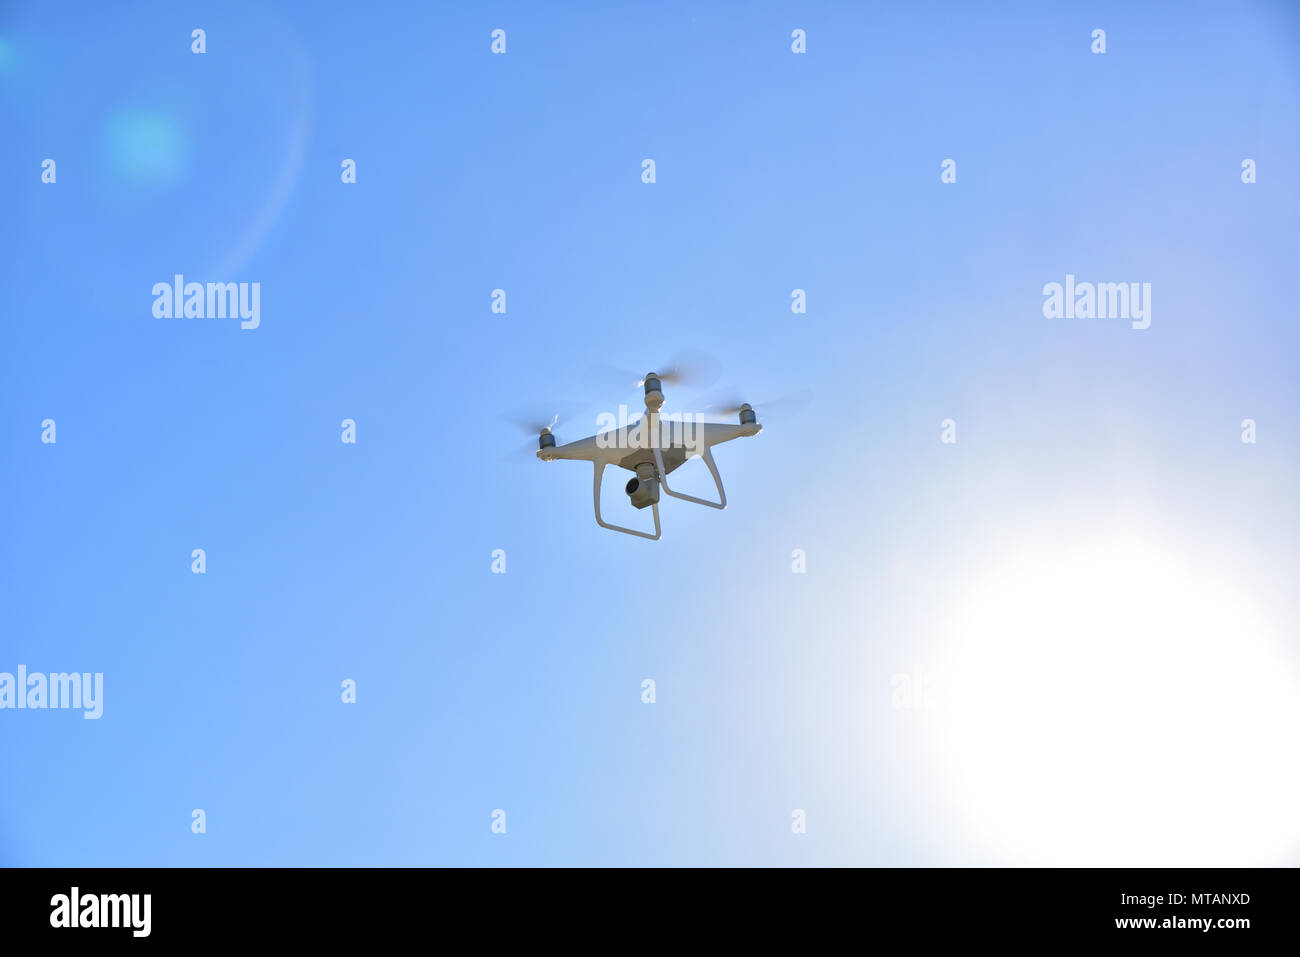 Professional drone with camera for photo and video recording flying with sky in the background Stock Photo